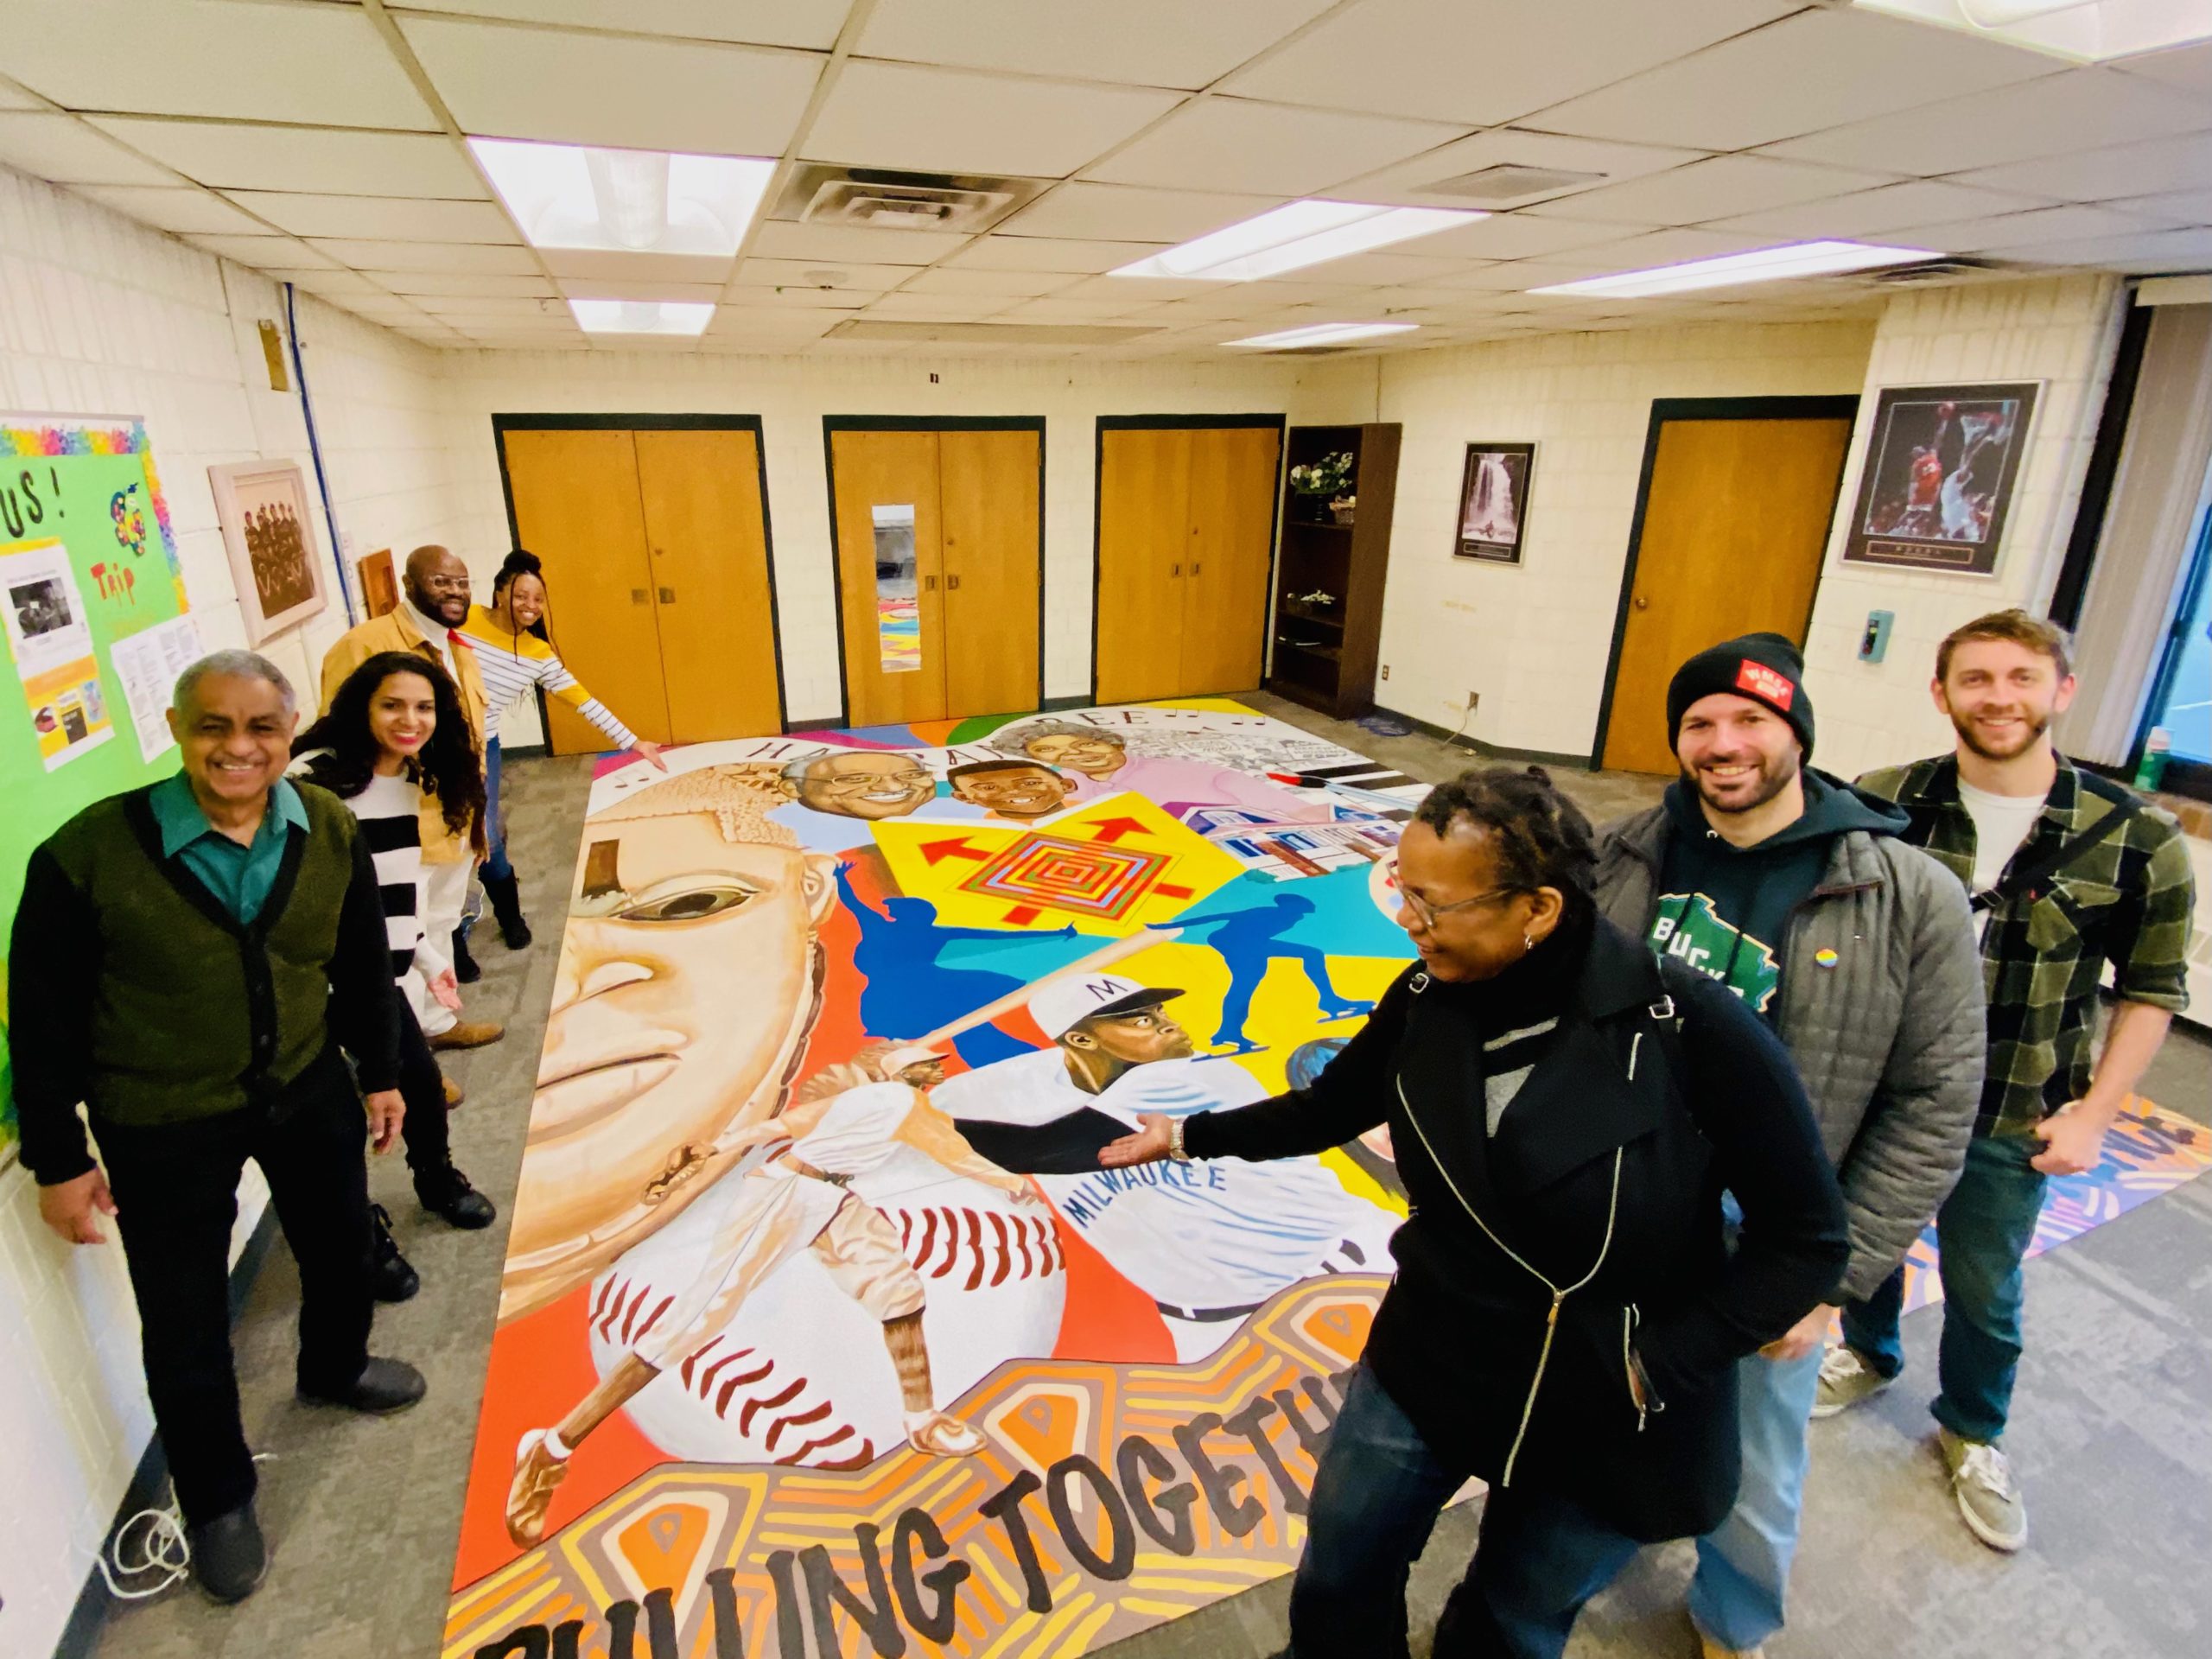 A group of people smiling while presenting a mural